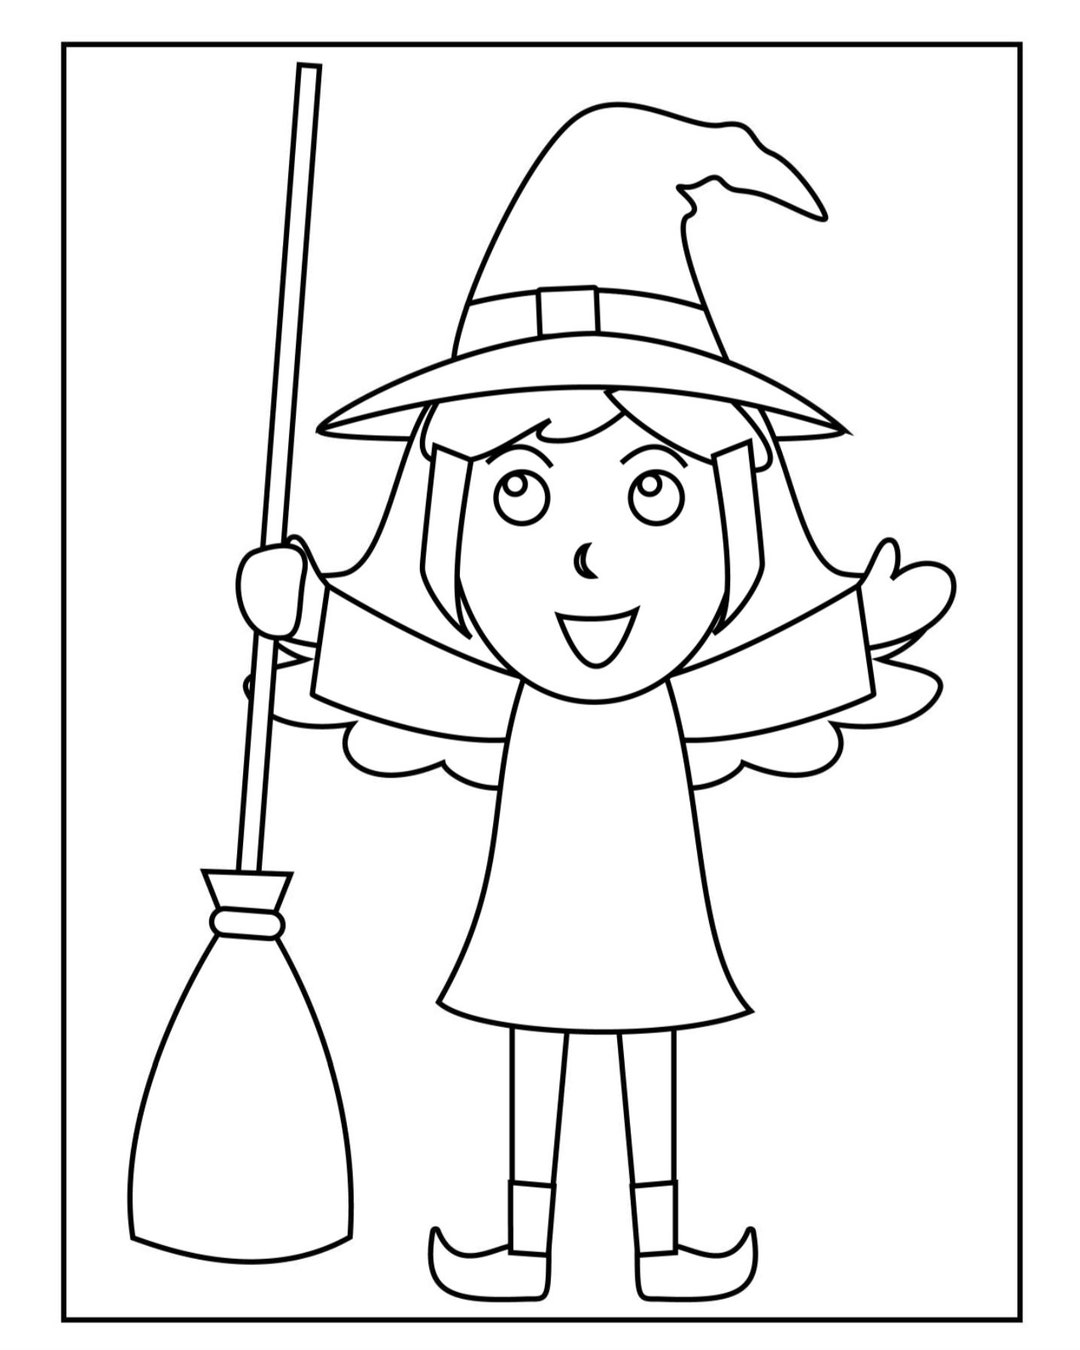 Halloween Coloring Pages 101 Pages - Etsy